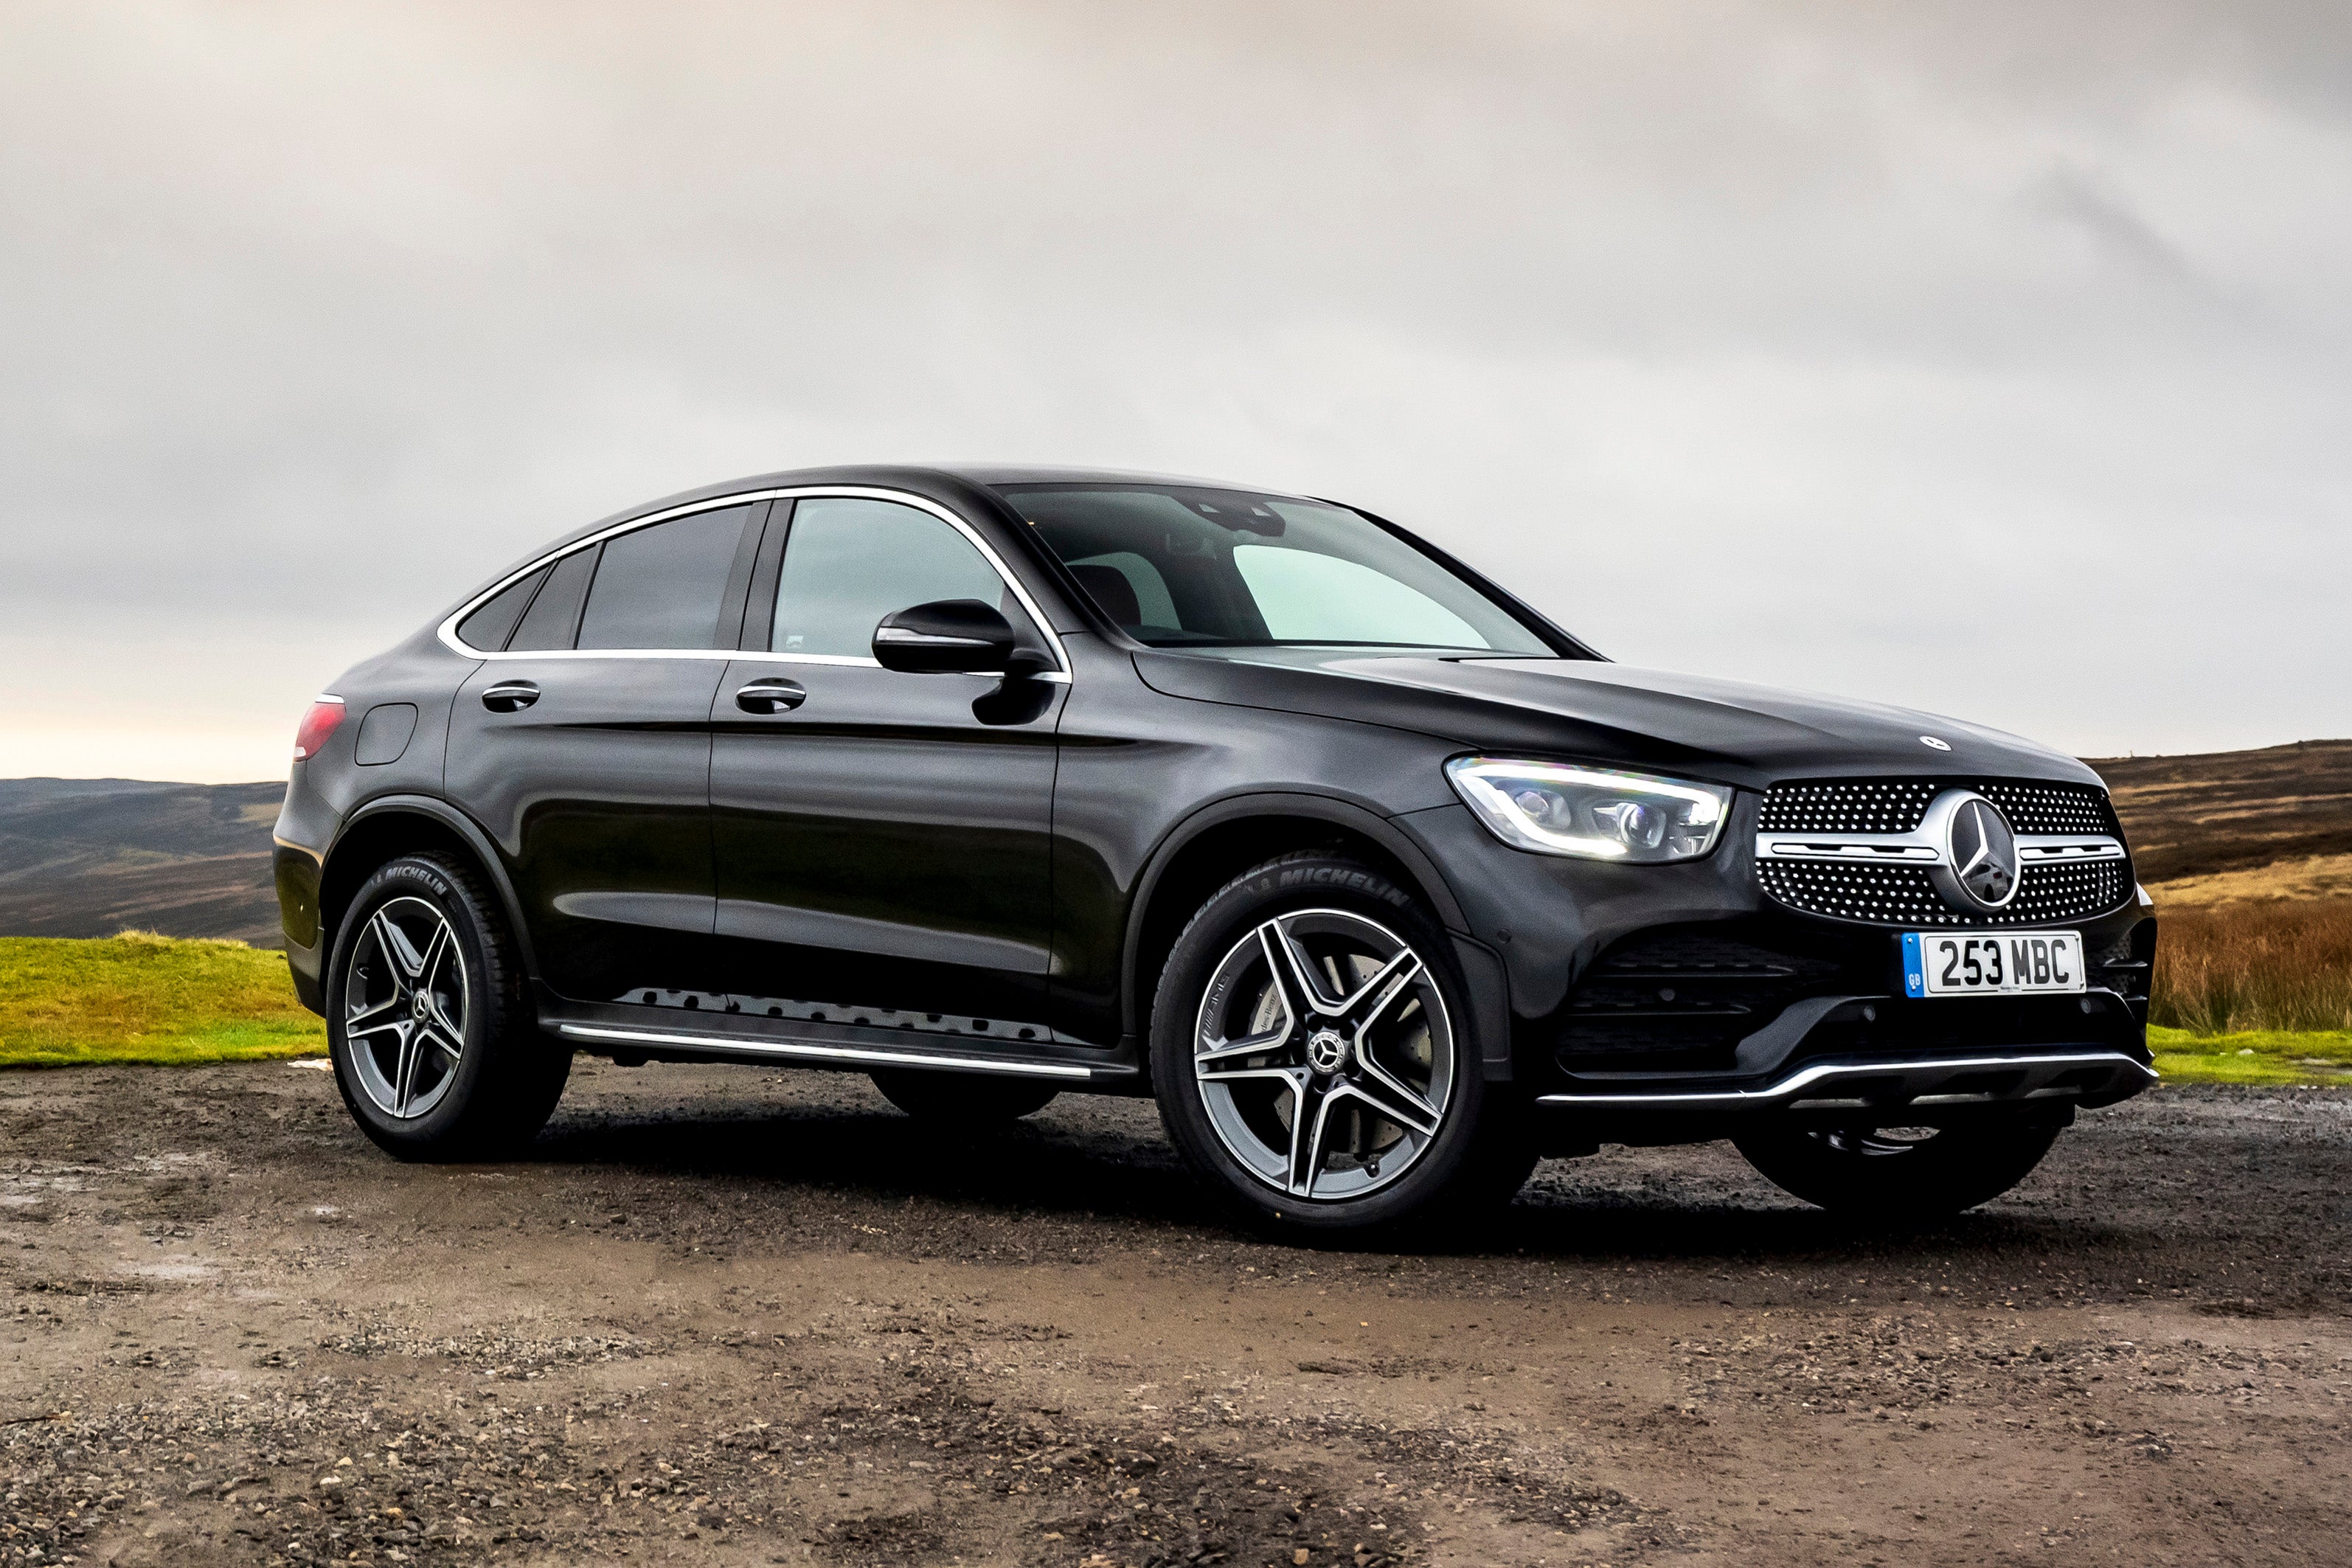 Mercedes GLC Coupe review: sacrificing substance for style